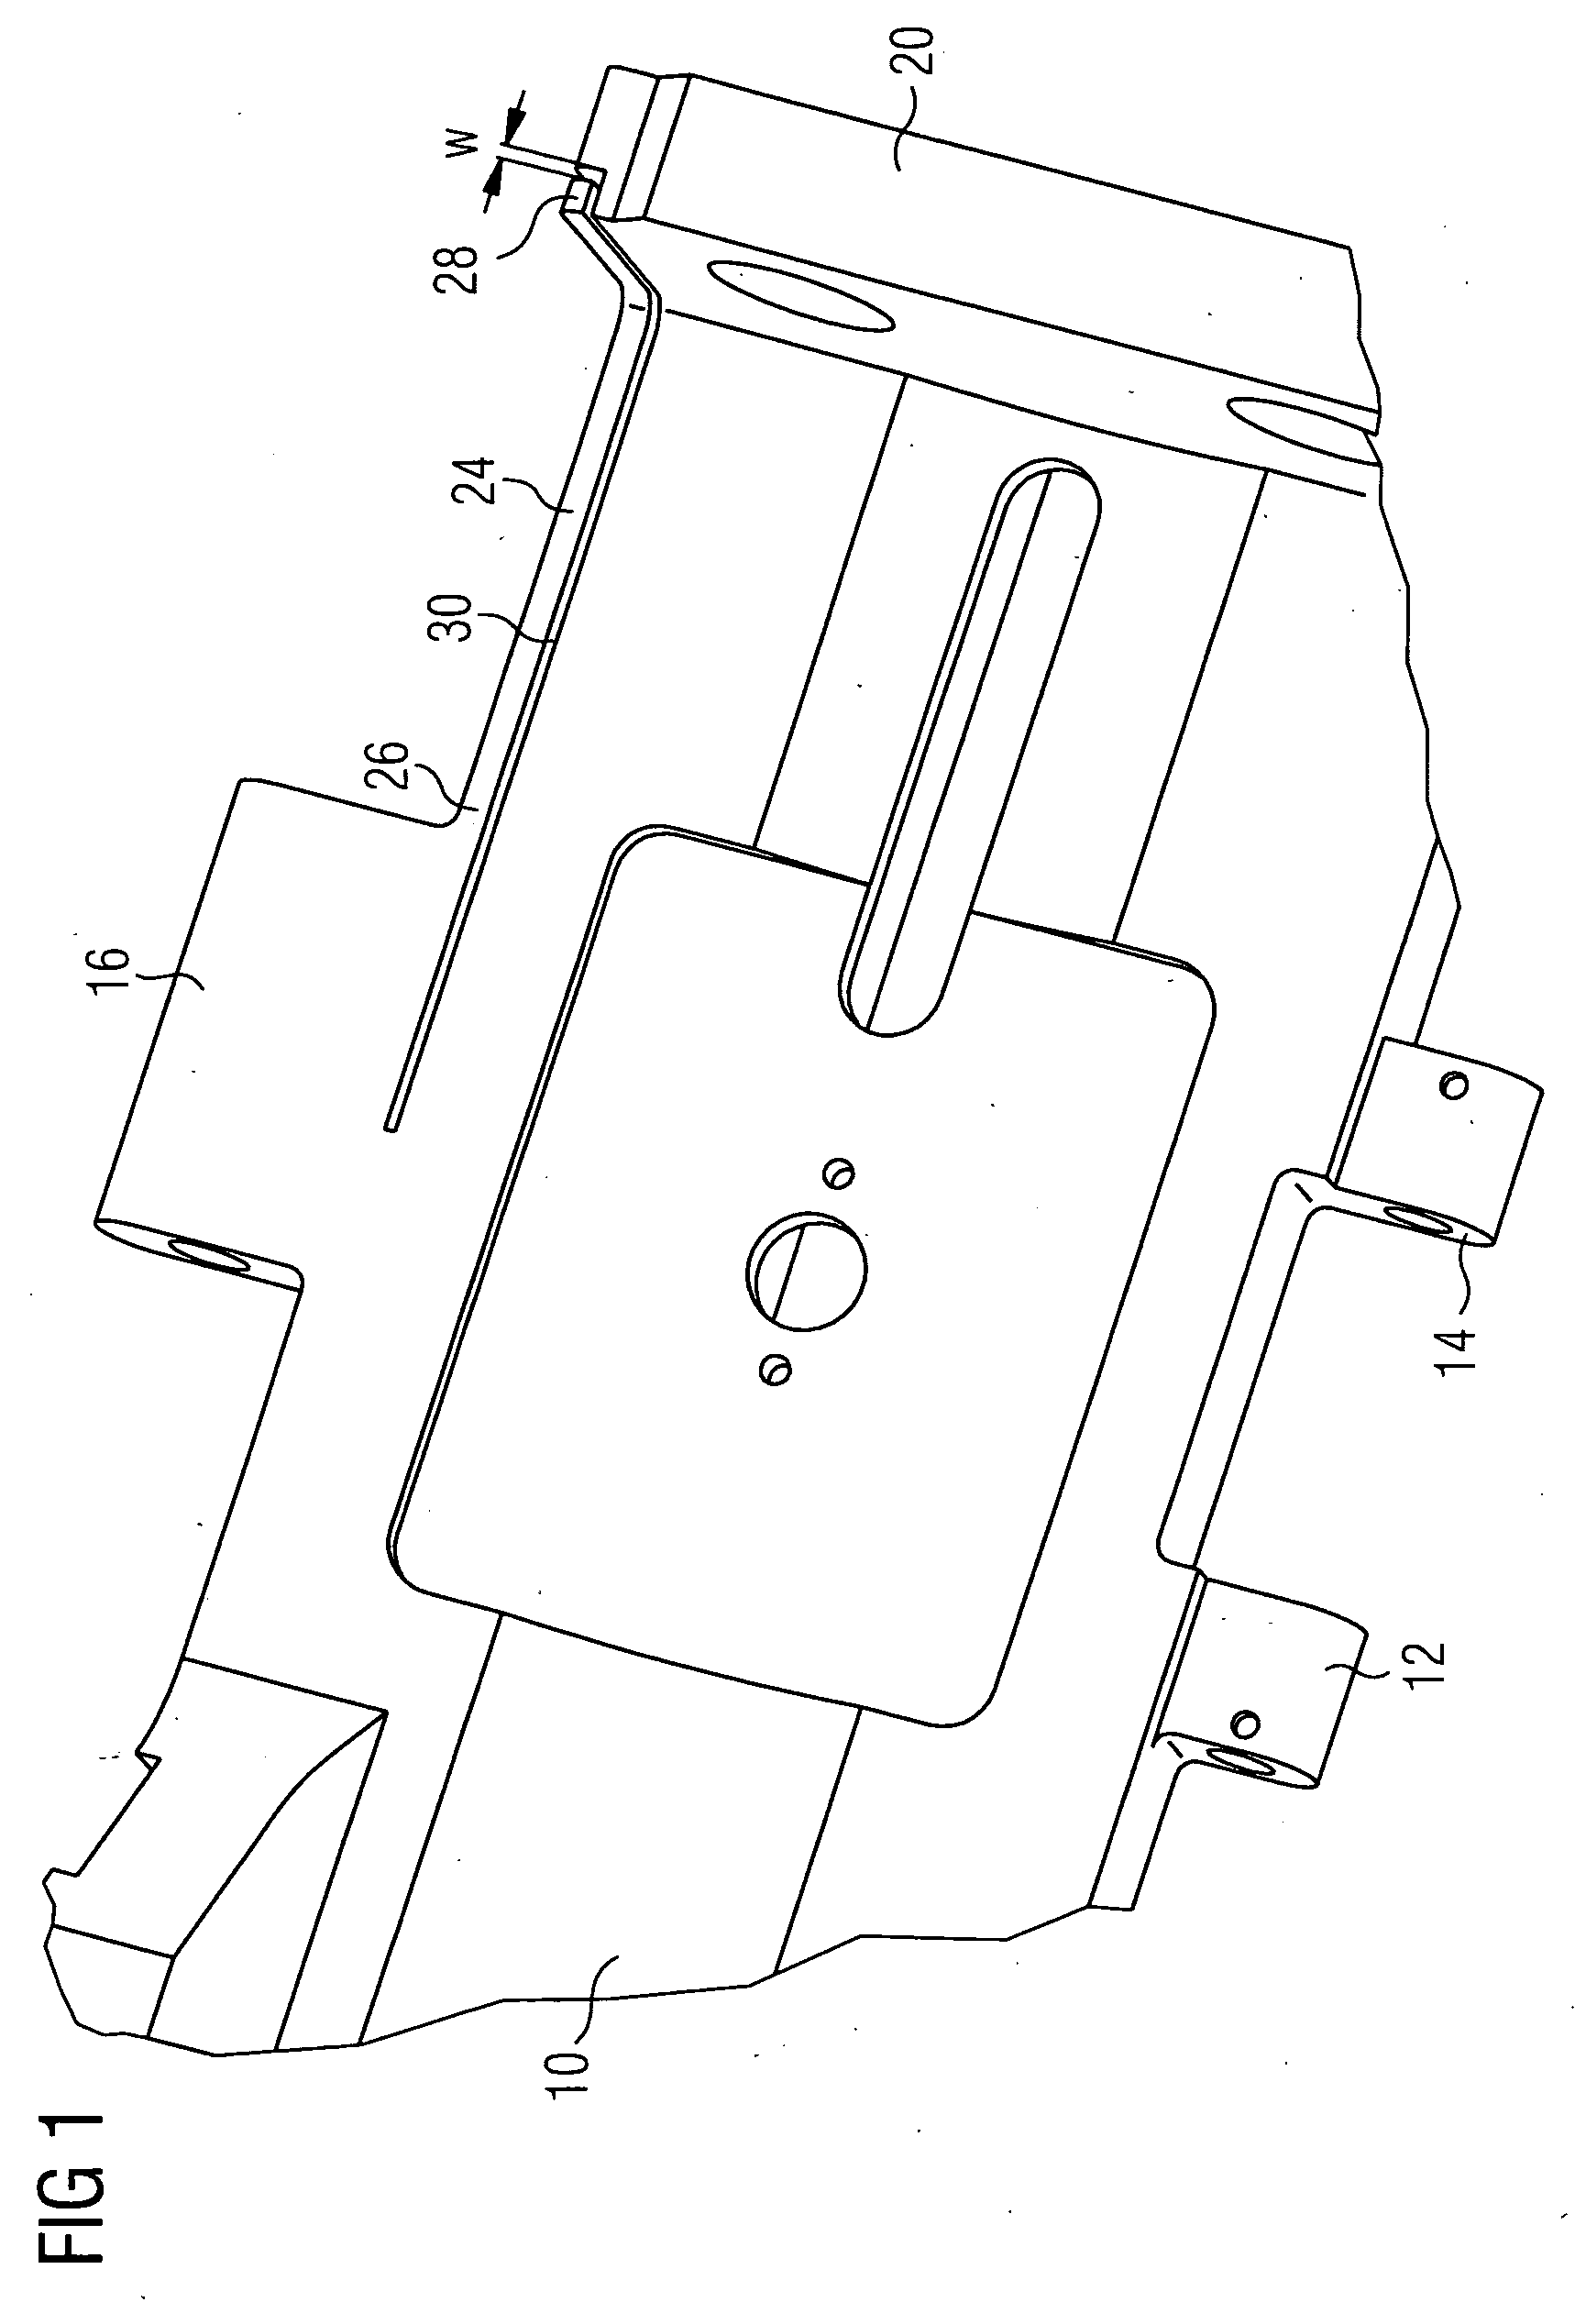 Disk Brake Provided With an Improved Device for Measuring the Normal Applied Force